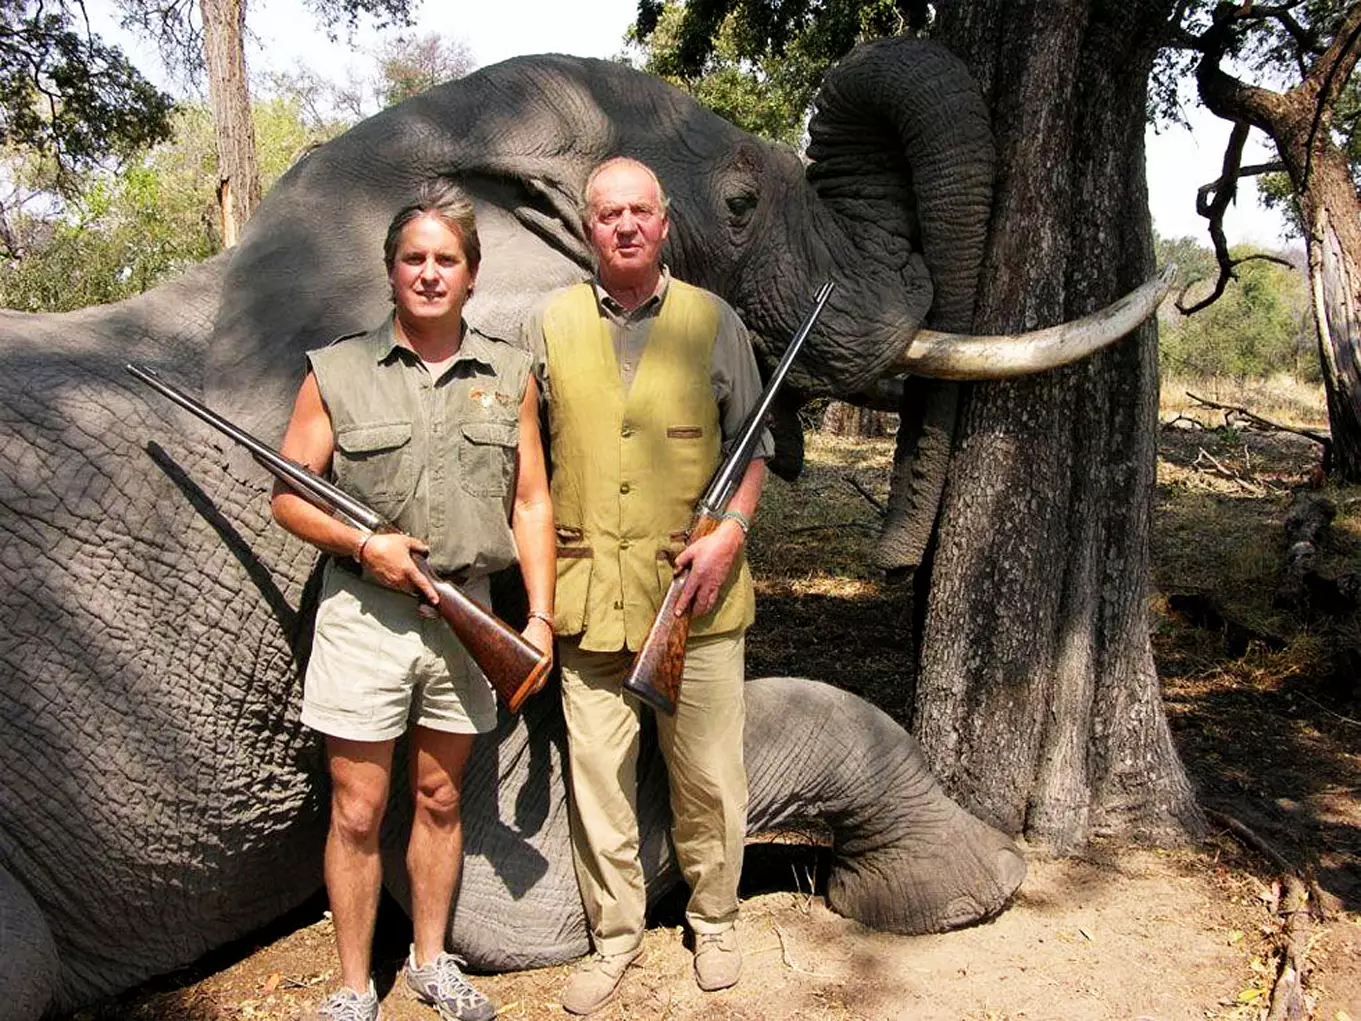 Population control is often used as a cover for trophy hunting.